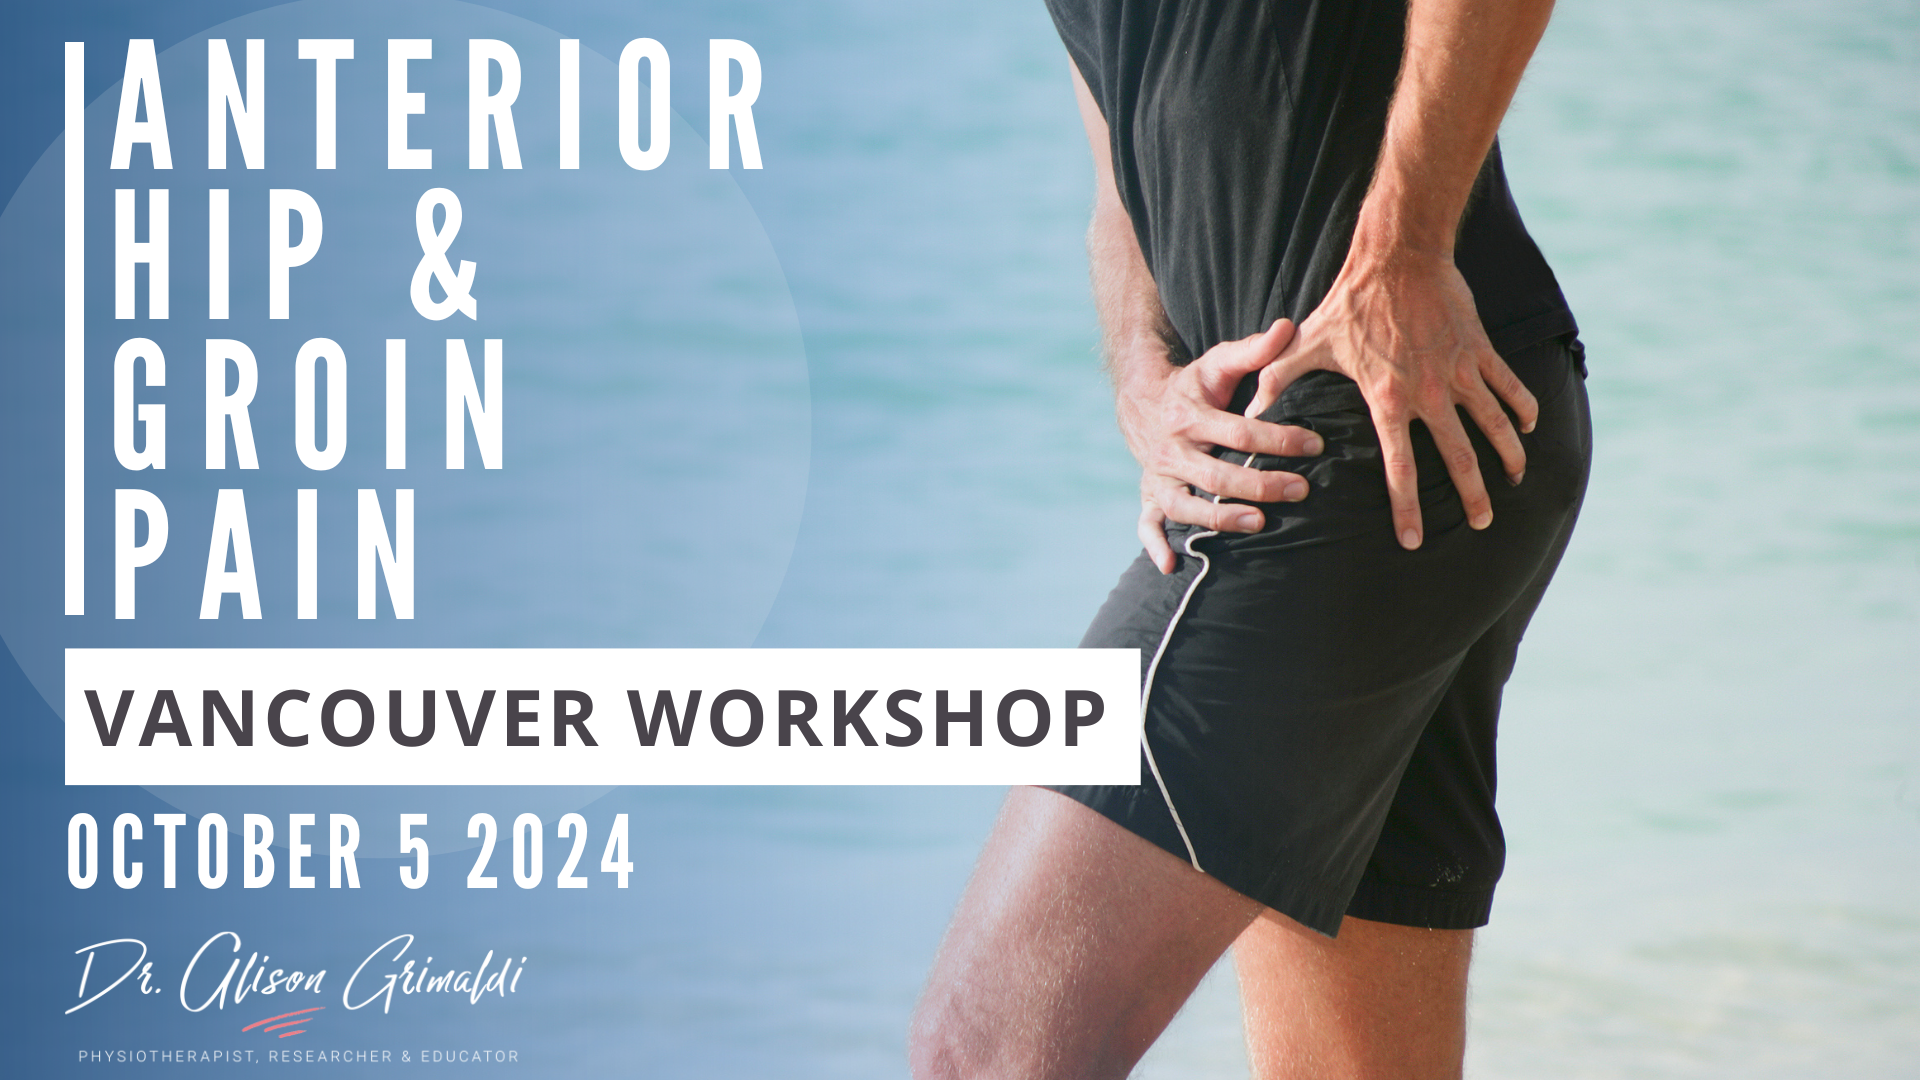 Anterior-Hip-and-Groin-Pain-Workshop-Vancouver-2024